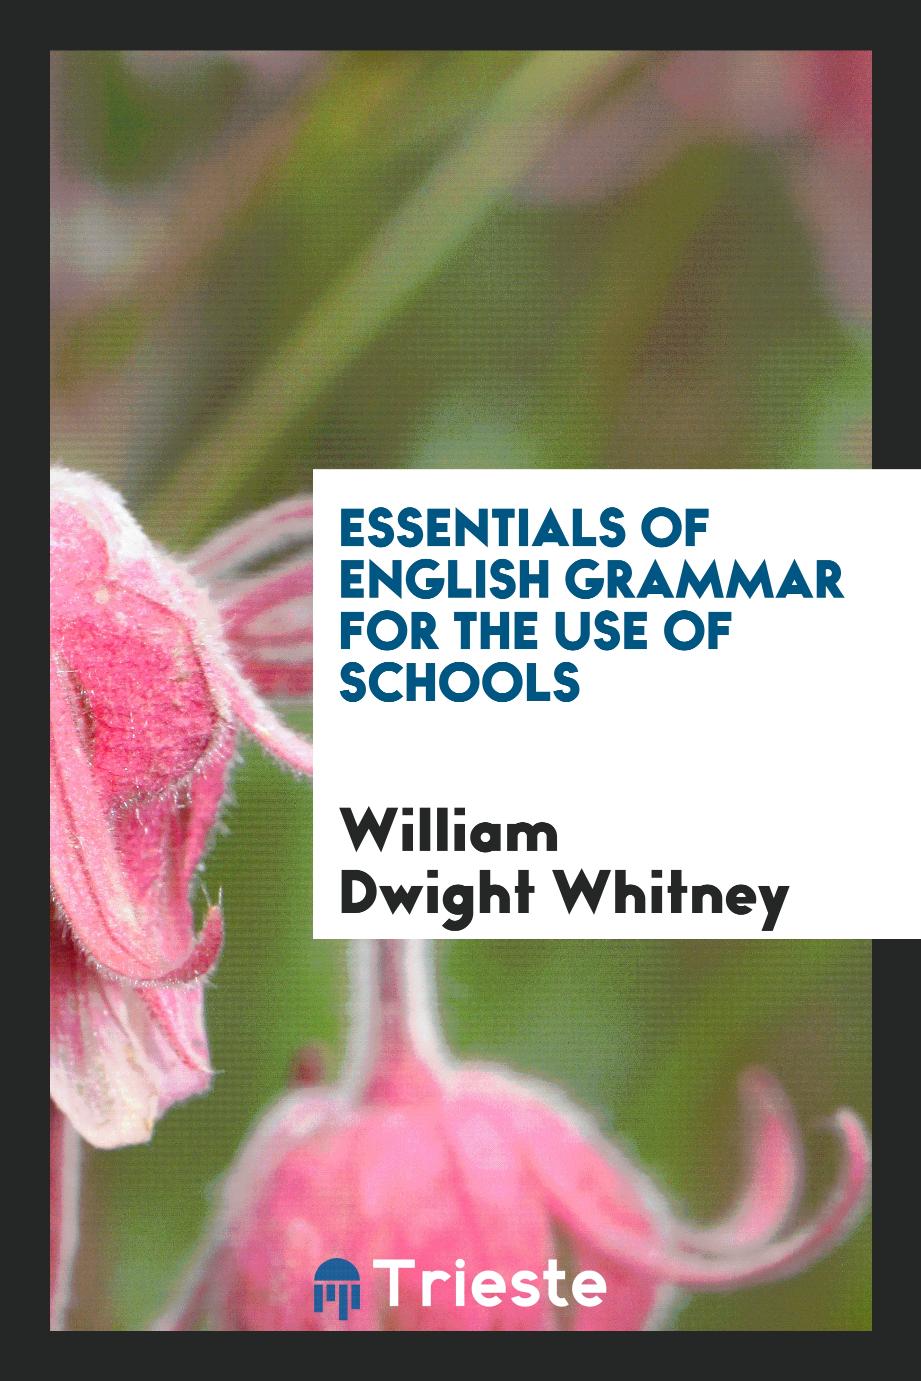 Essentials of English Grammar for the Use of Schools